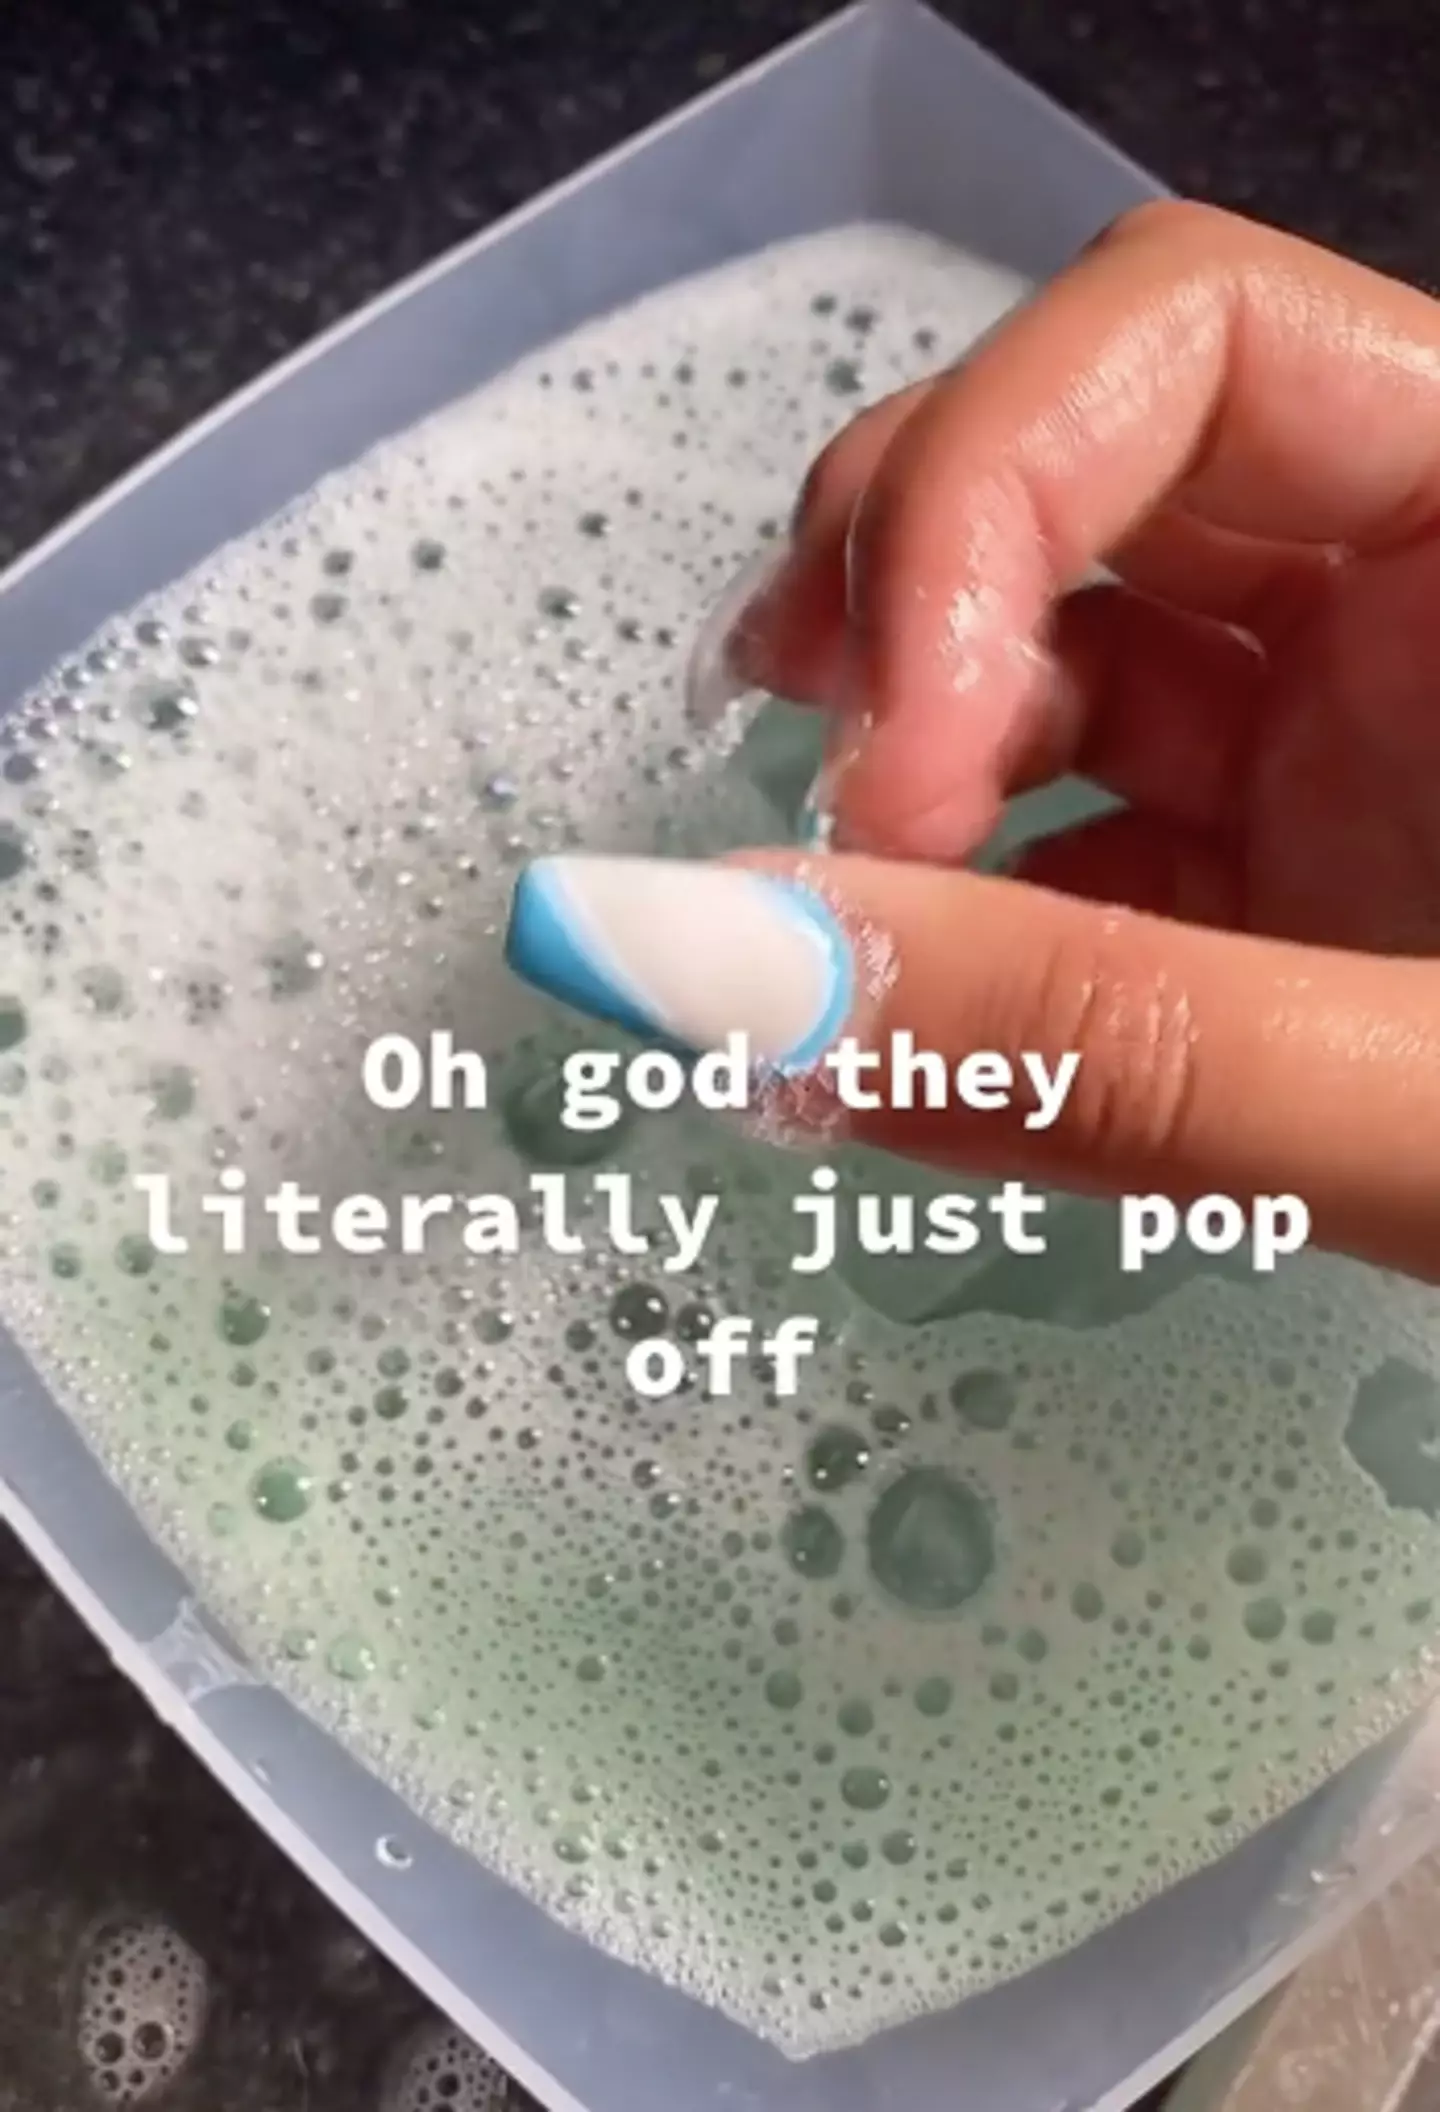 The woman revealed the nails simply popped off after soaking (